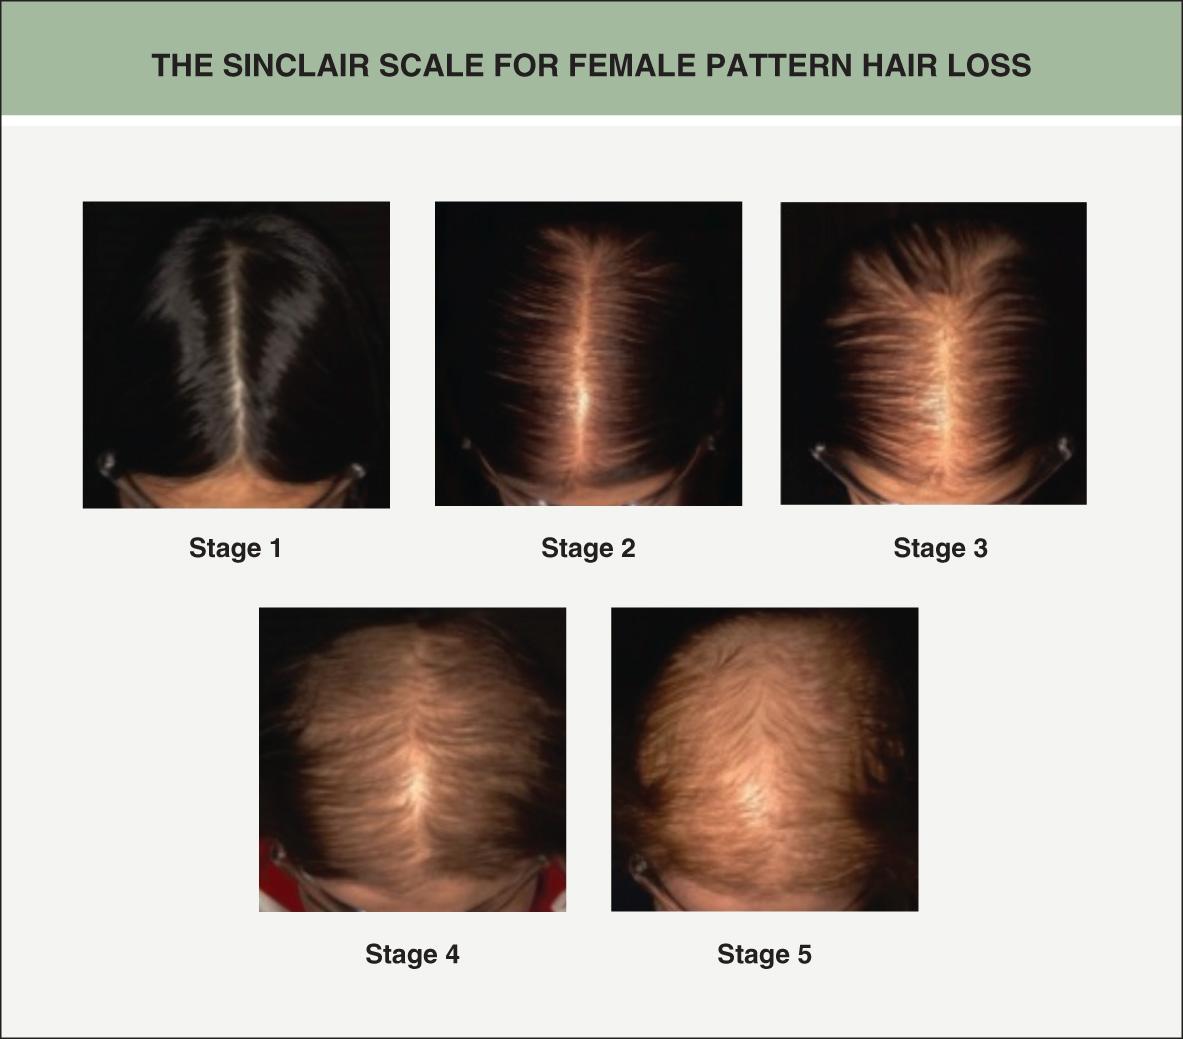 Fig. 69.5, The Sinclair scale for female pattern hair loss.